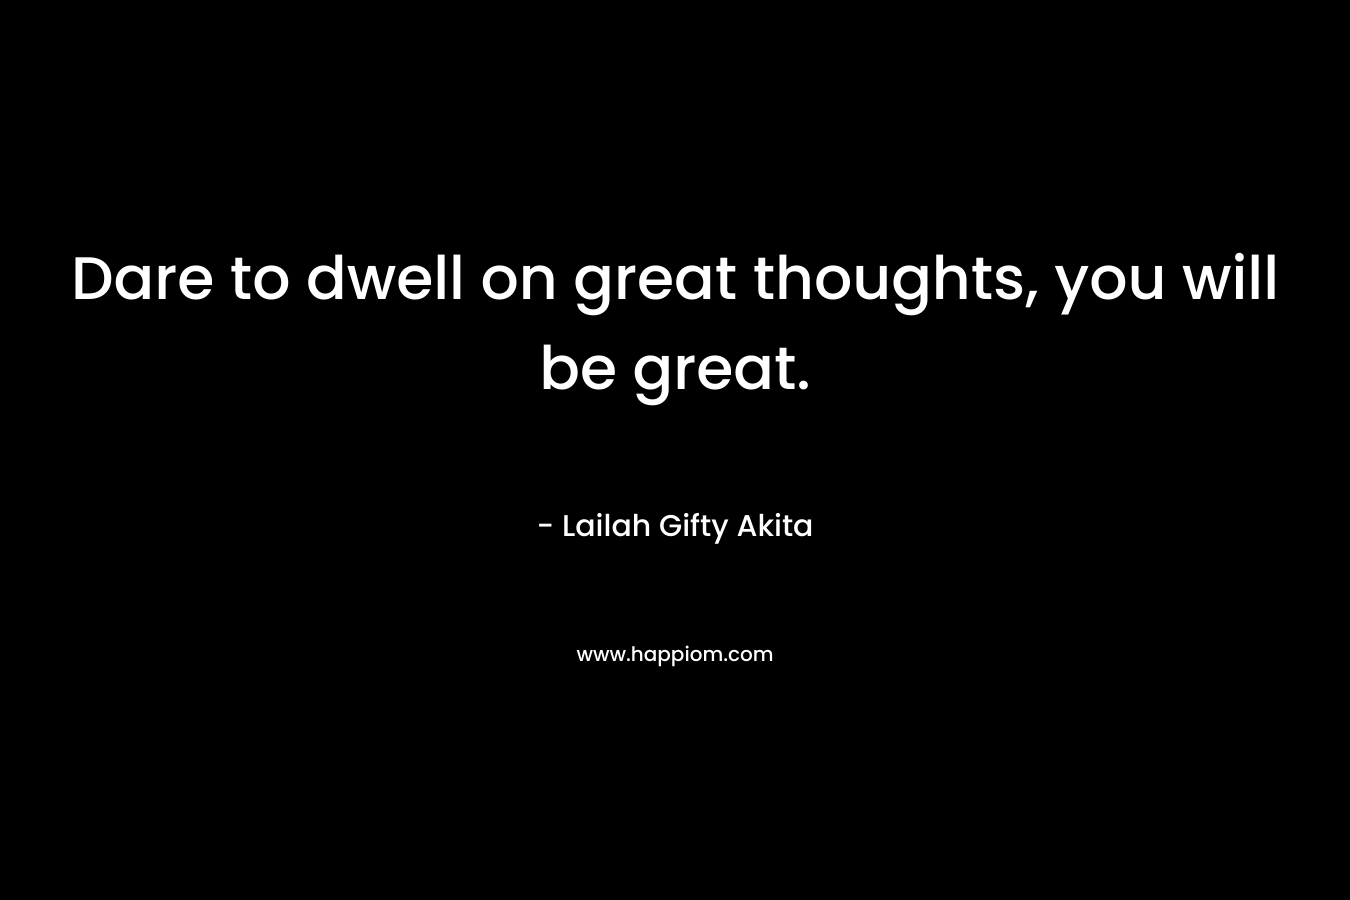 Dare to dwell on great thoughts, you will be great.